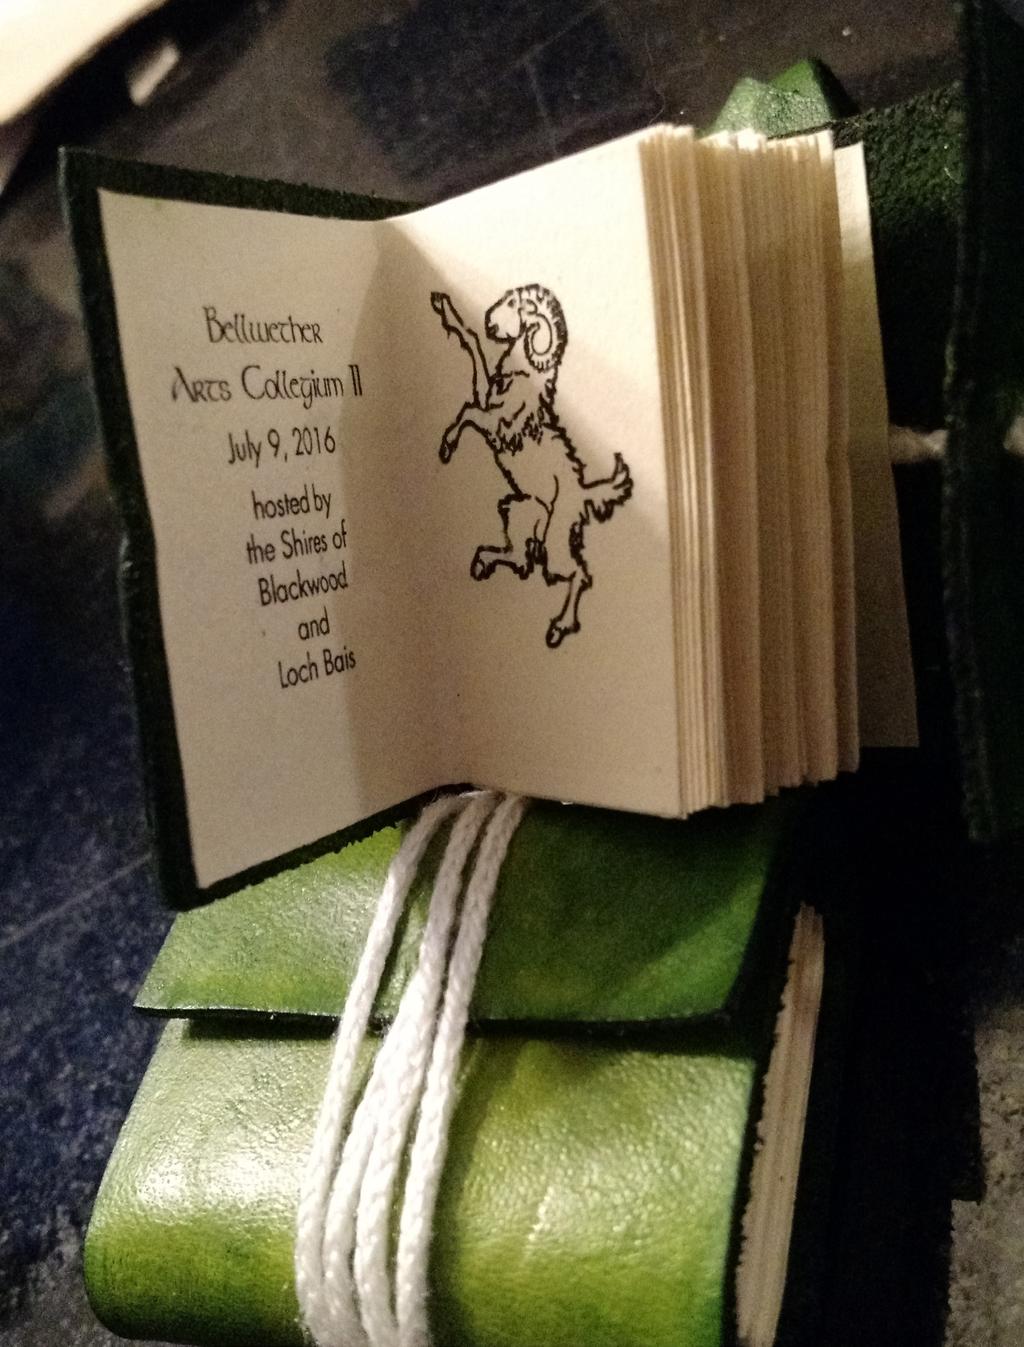 Binding a Limp-bound Book which make great site tokens or personal